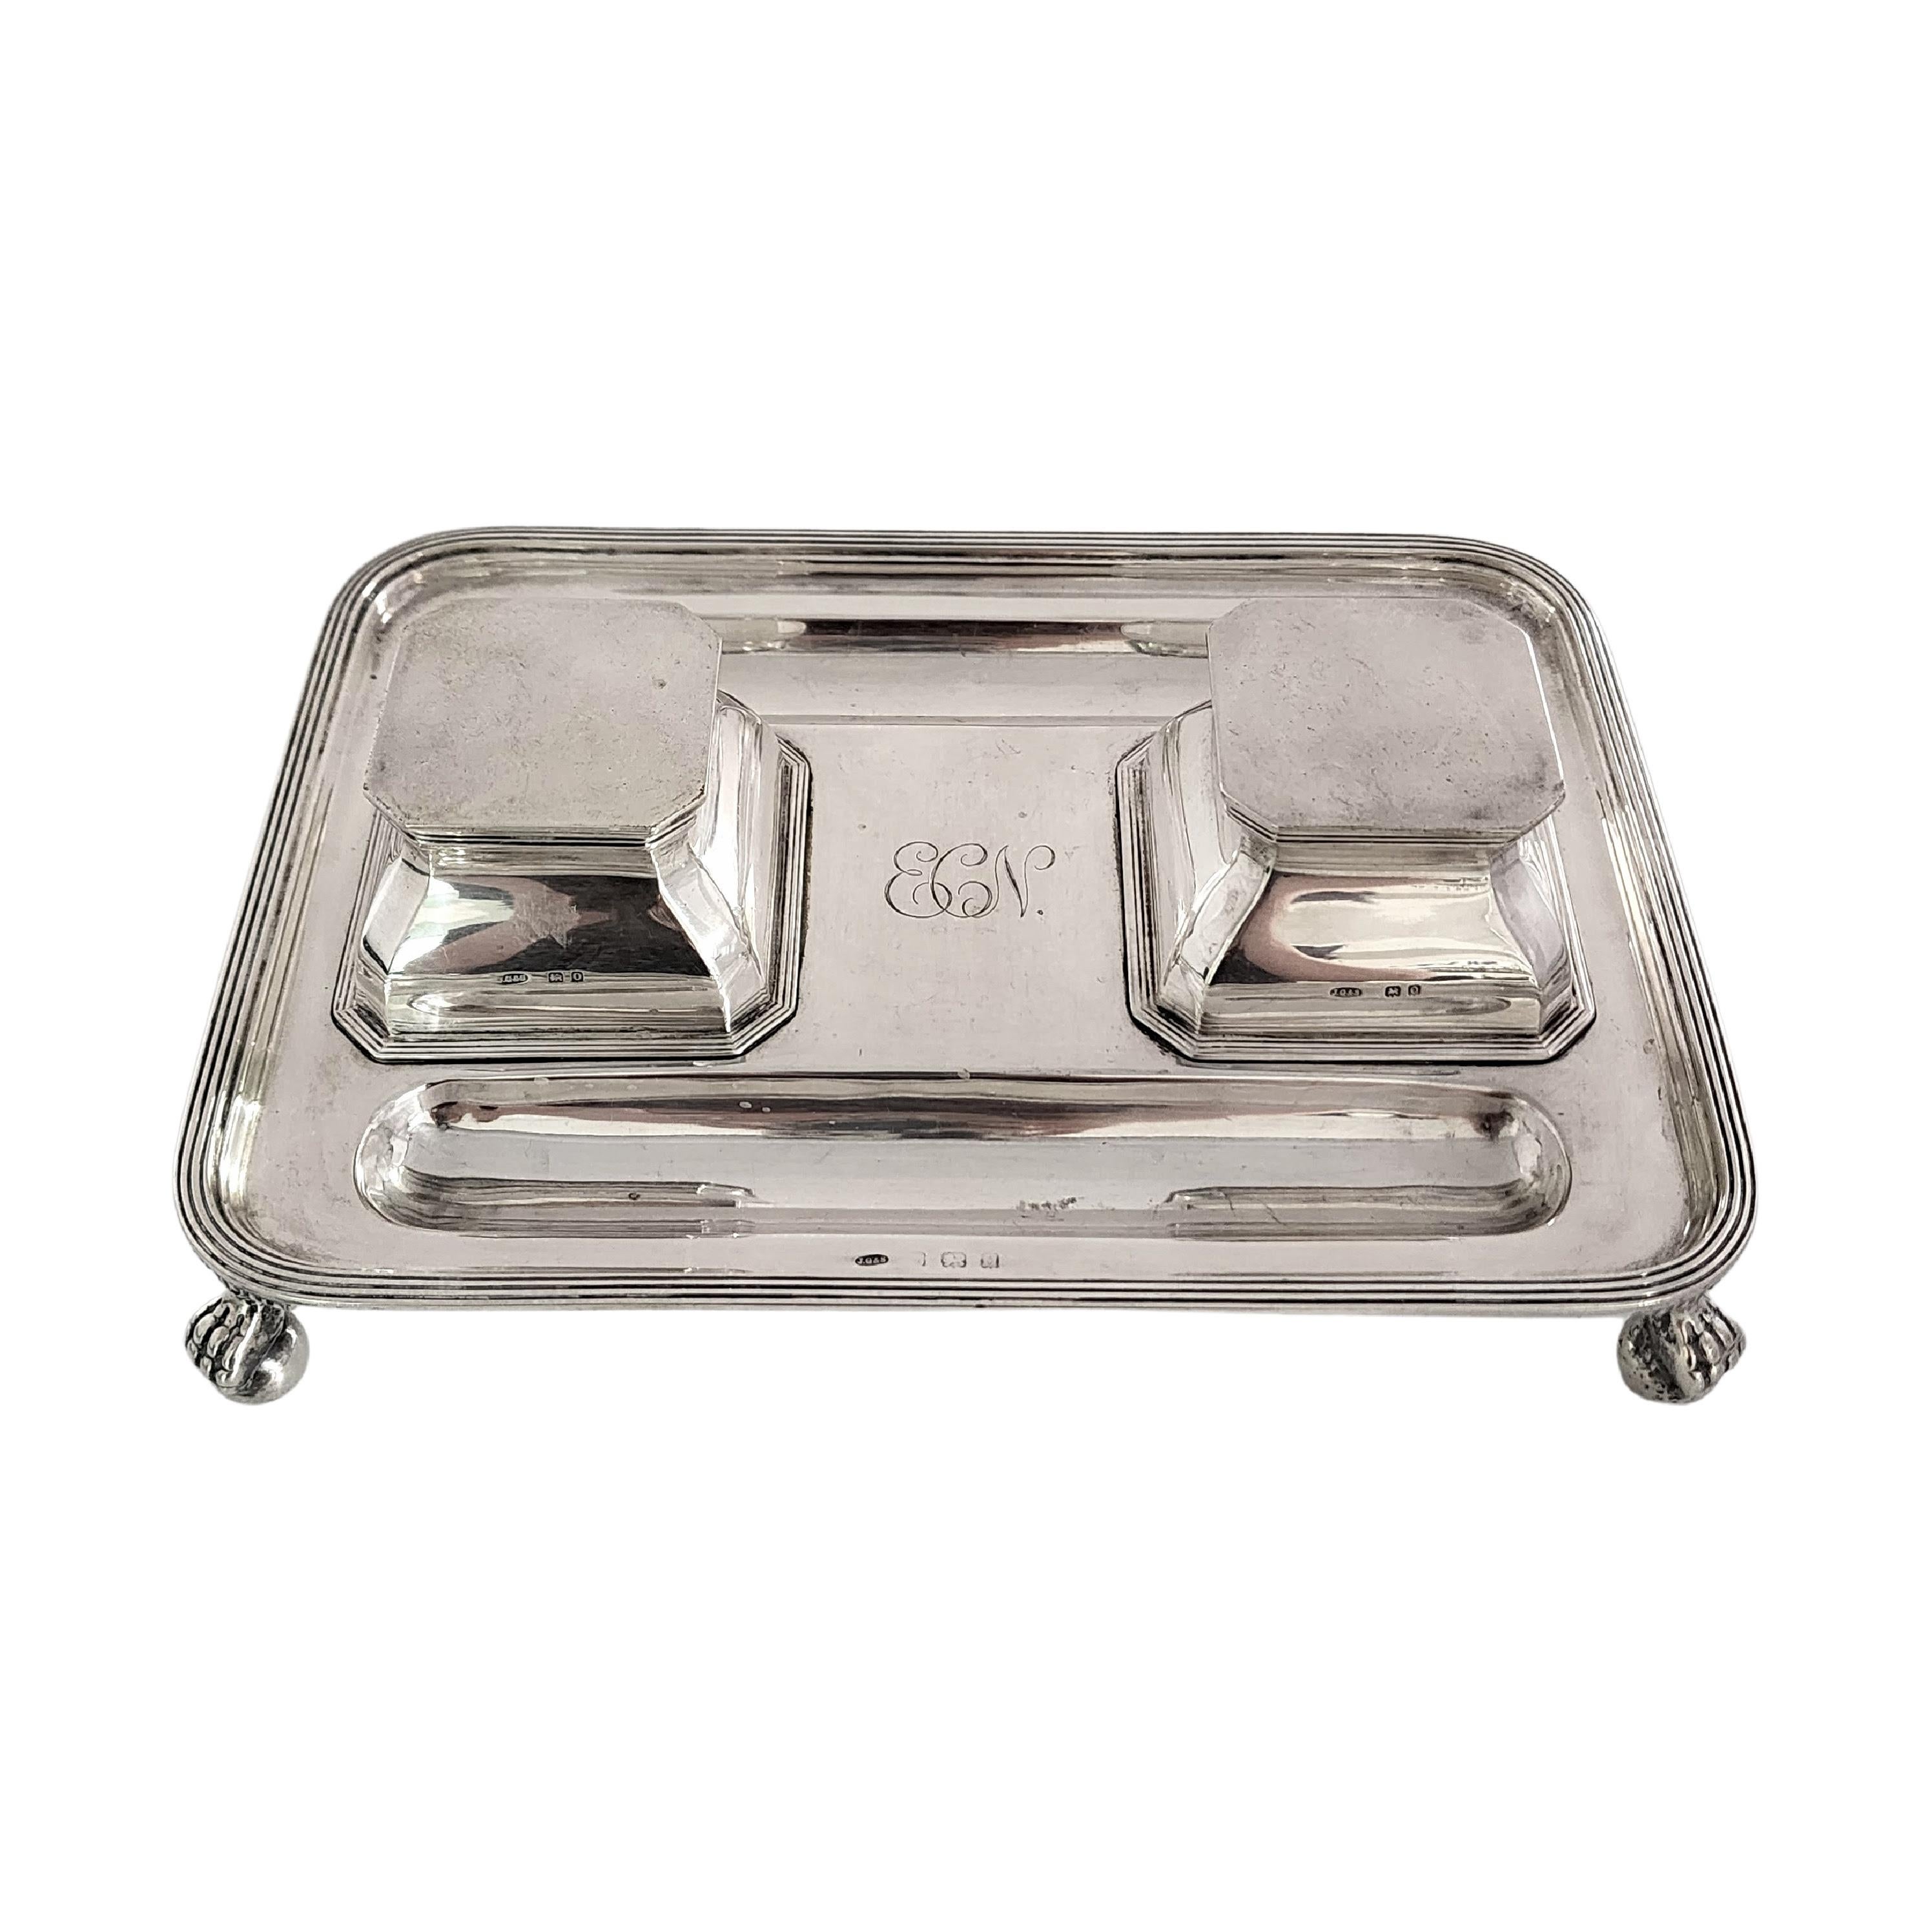 Sterling silver inkwell inkstand desk set with monogram by John Grinsell & Sons of Birmingham, England, circa 1938.

Monogram appears to be ECN

Rectangular footed inkstand desk set featuring 2 inkwell bottles each with a hinged lid and 2 concave